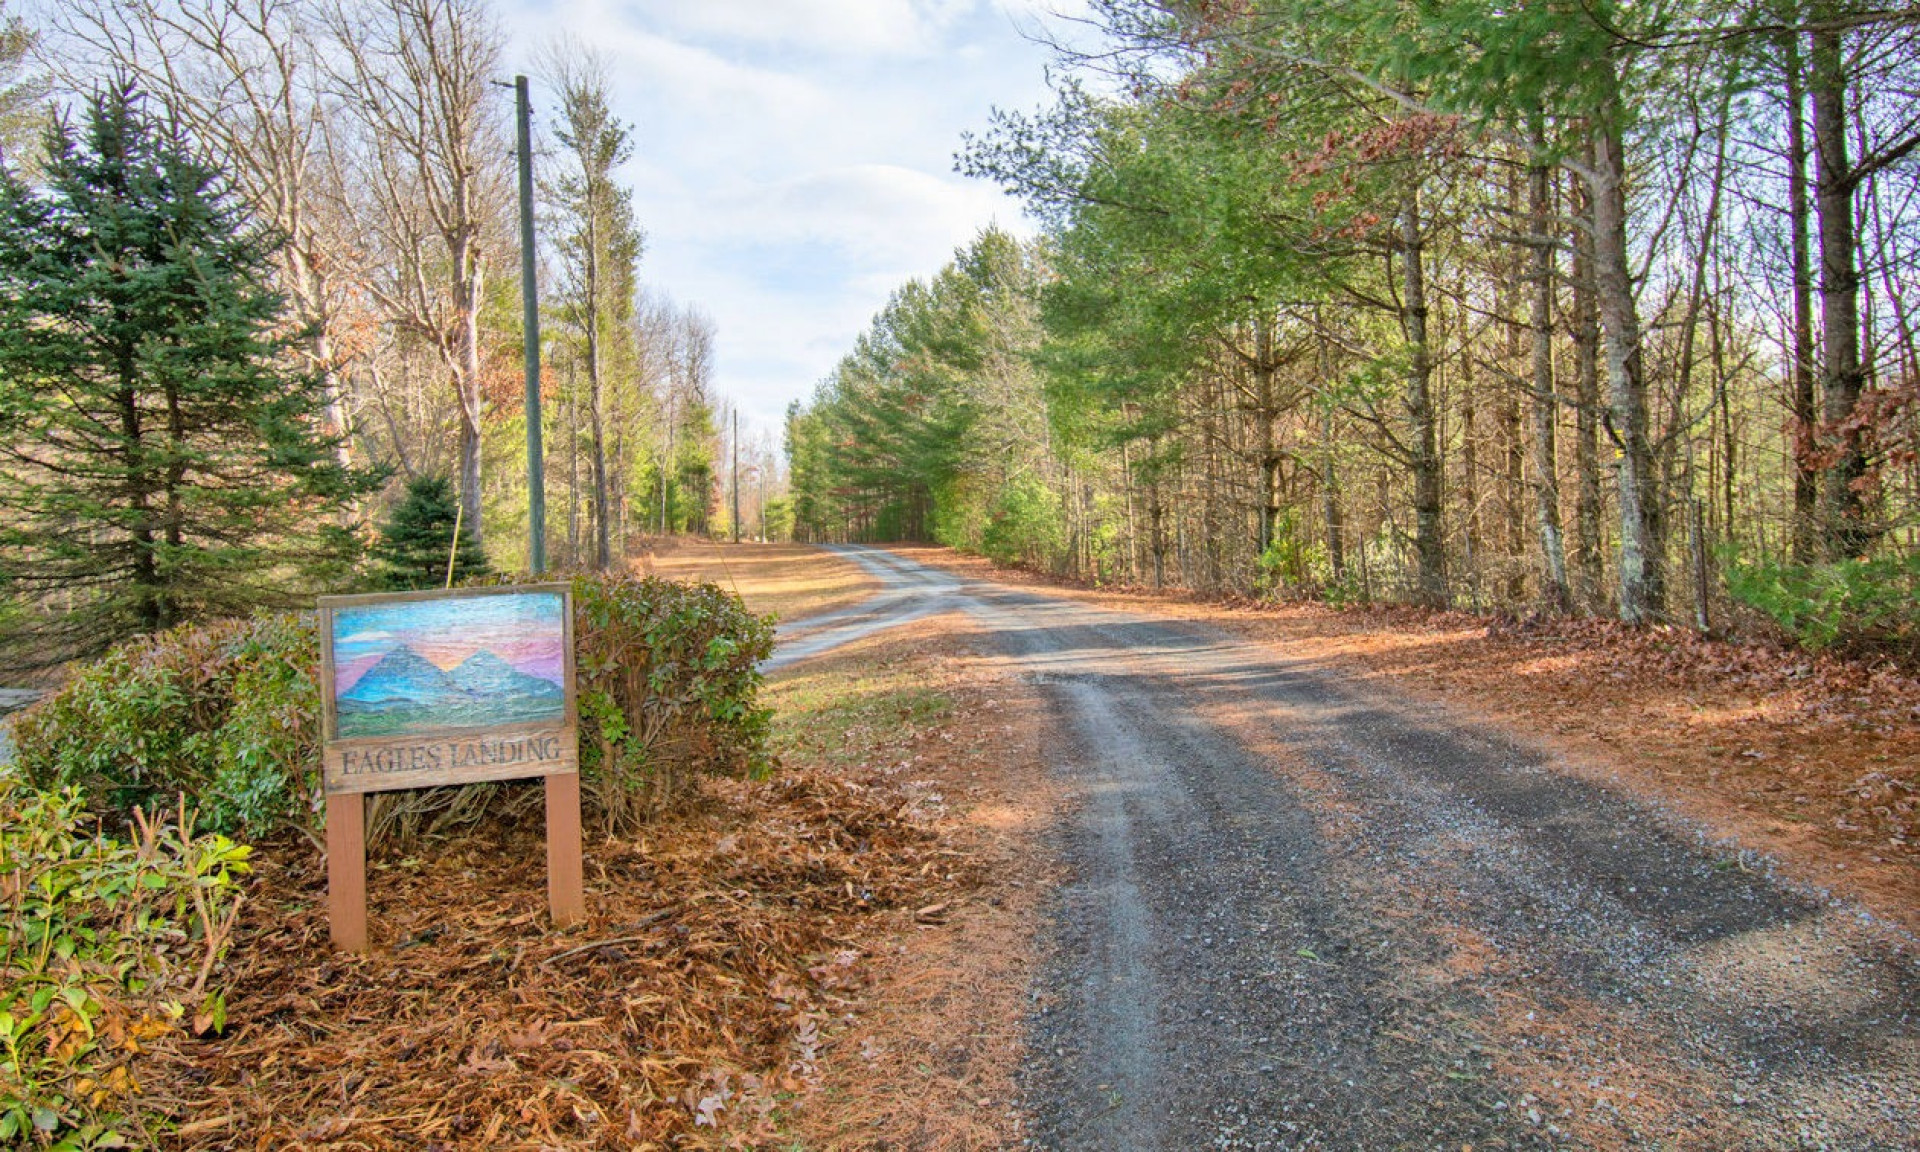 Eagles Landing is a small mountain community offering affordable homesites close to the New River and West Jefferson.